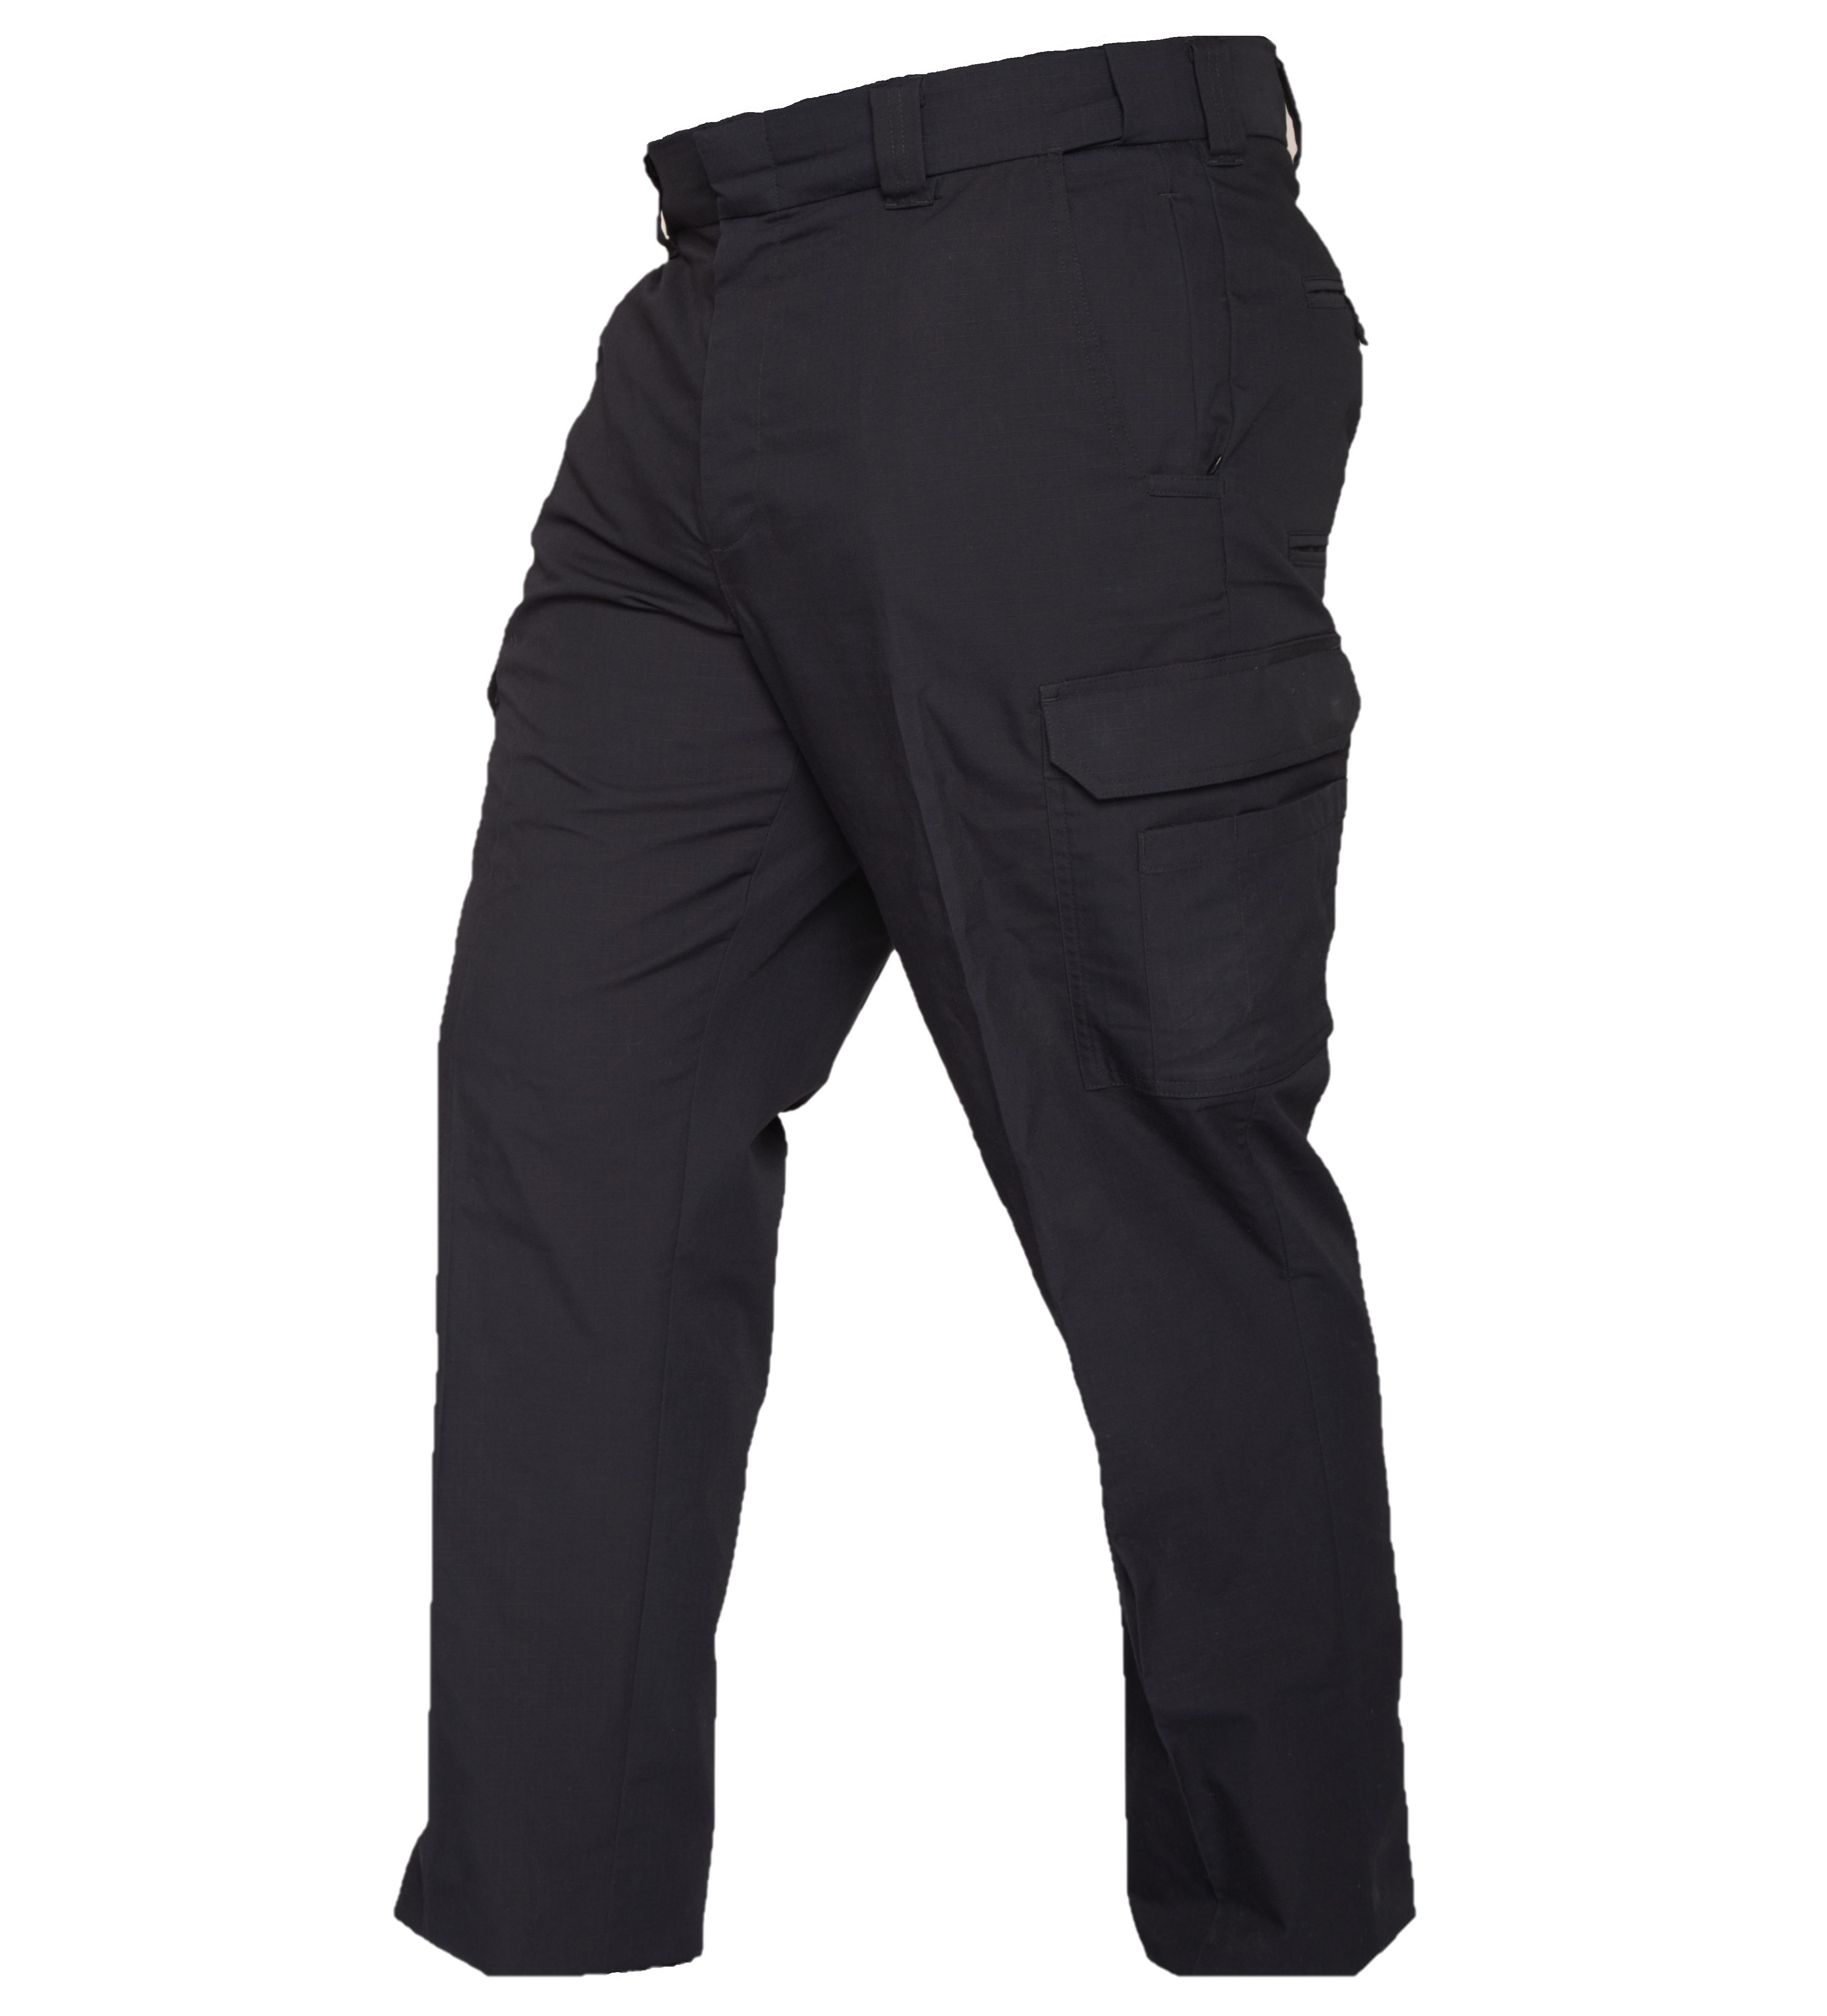 REFLEX STRETCH RIPSTOP CARGO PANTS | Frontline Outfitters